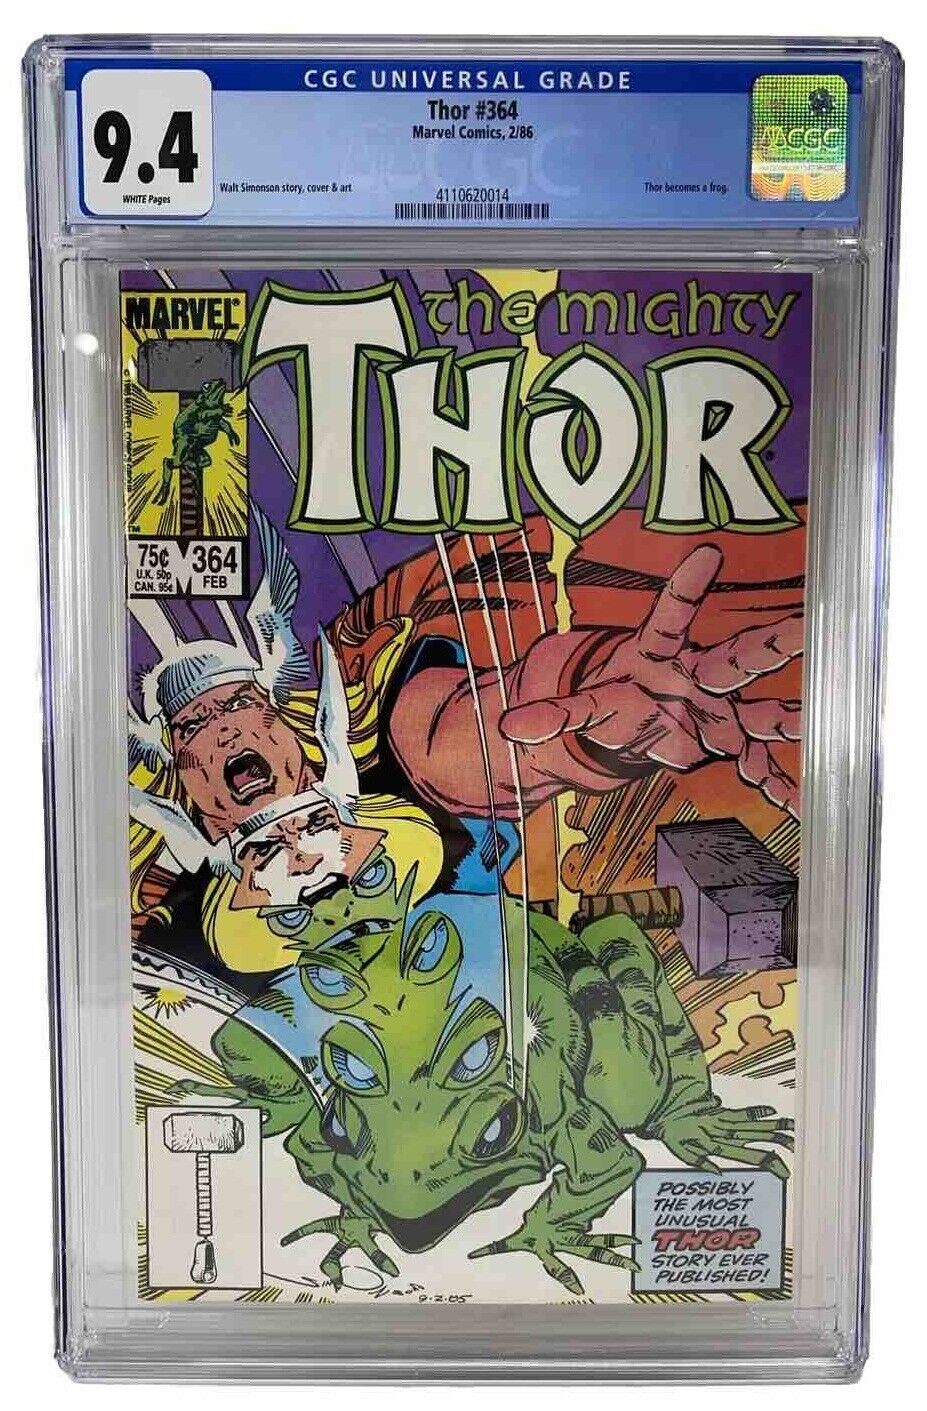 Mighty Thor #364 CGC 9.4 Thor Becomes a Frog Copper Age 1986 Walt Simpson Marvel